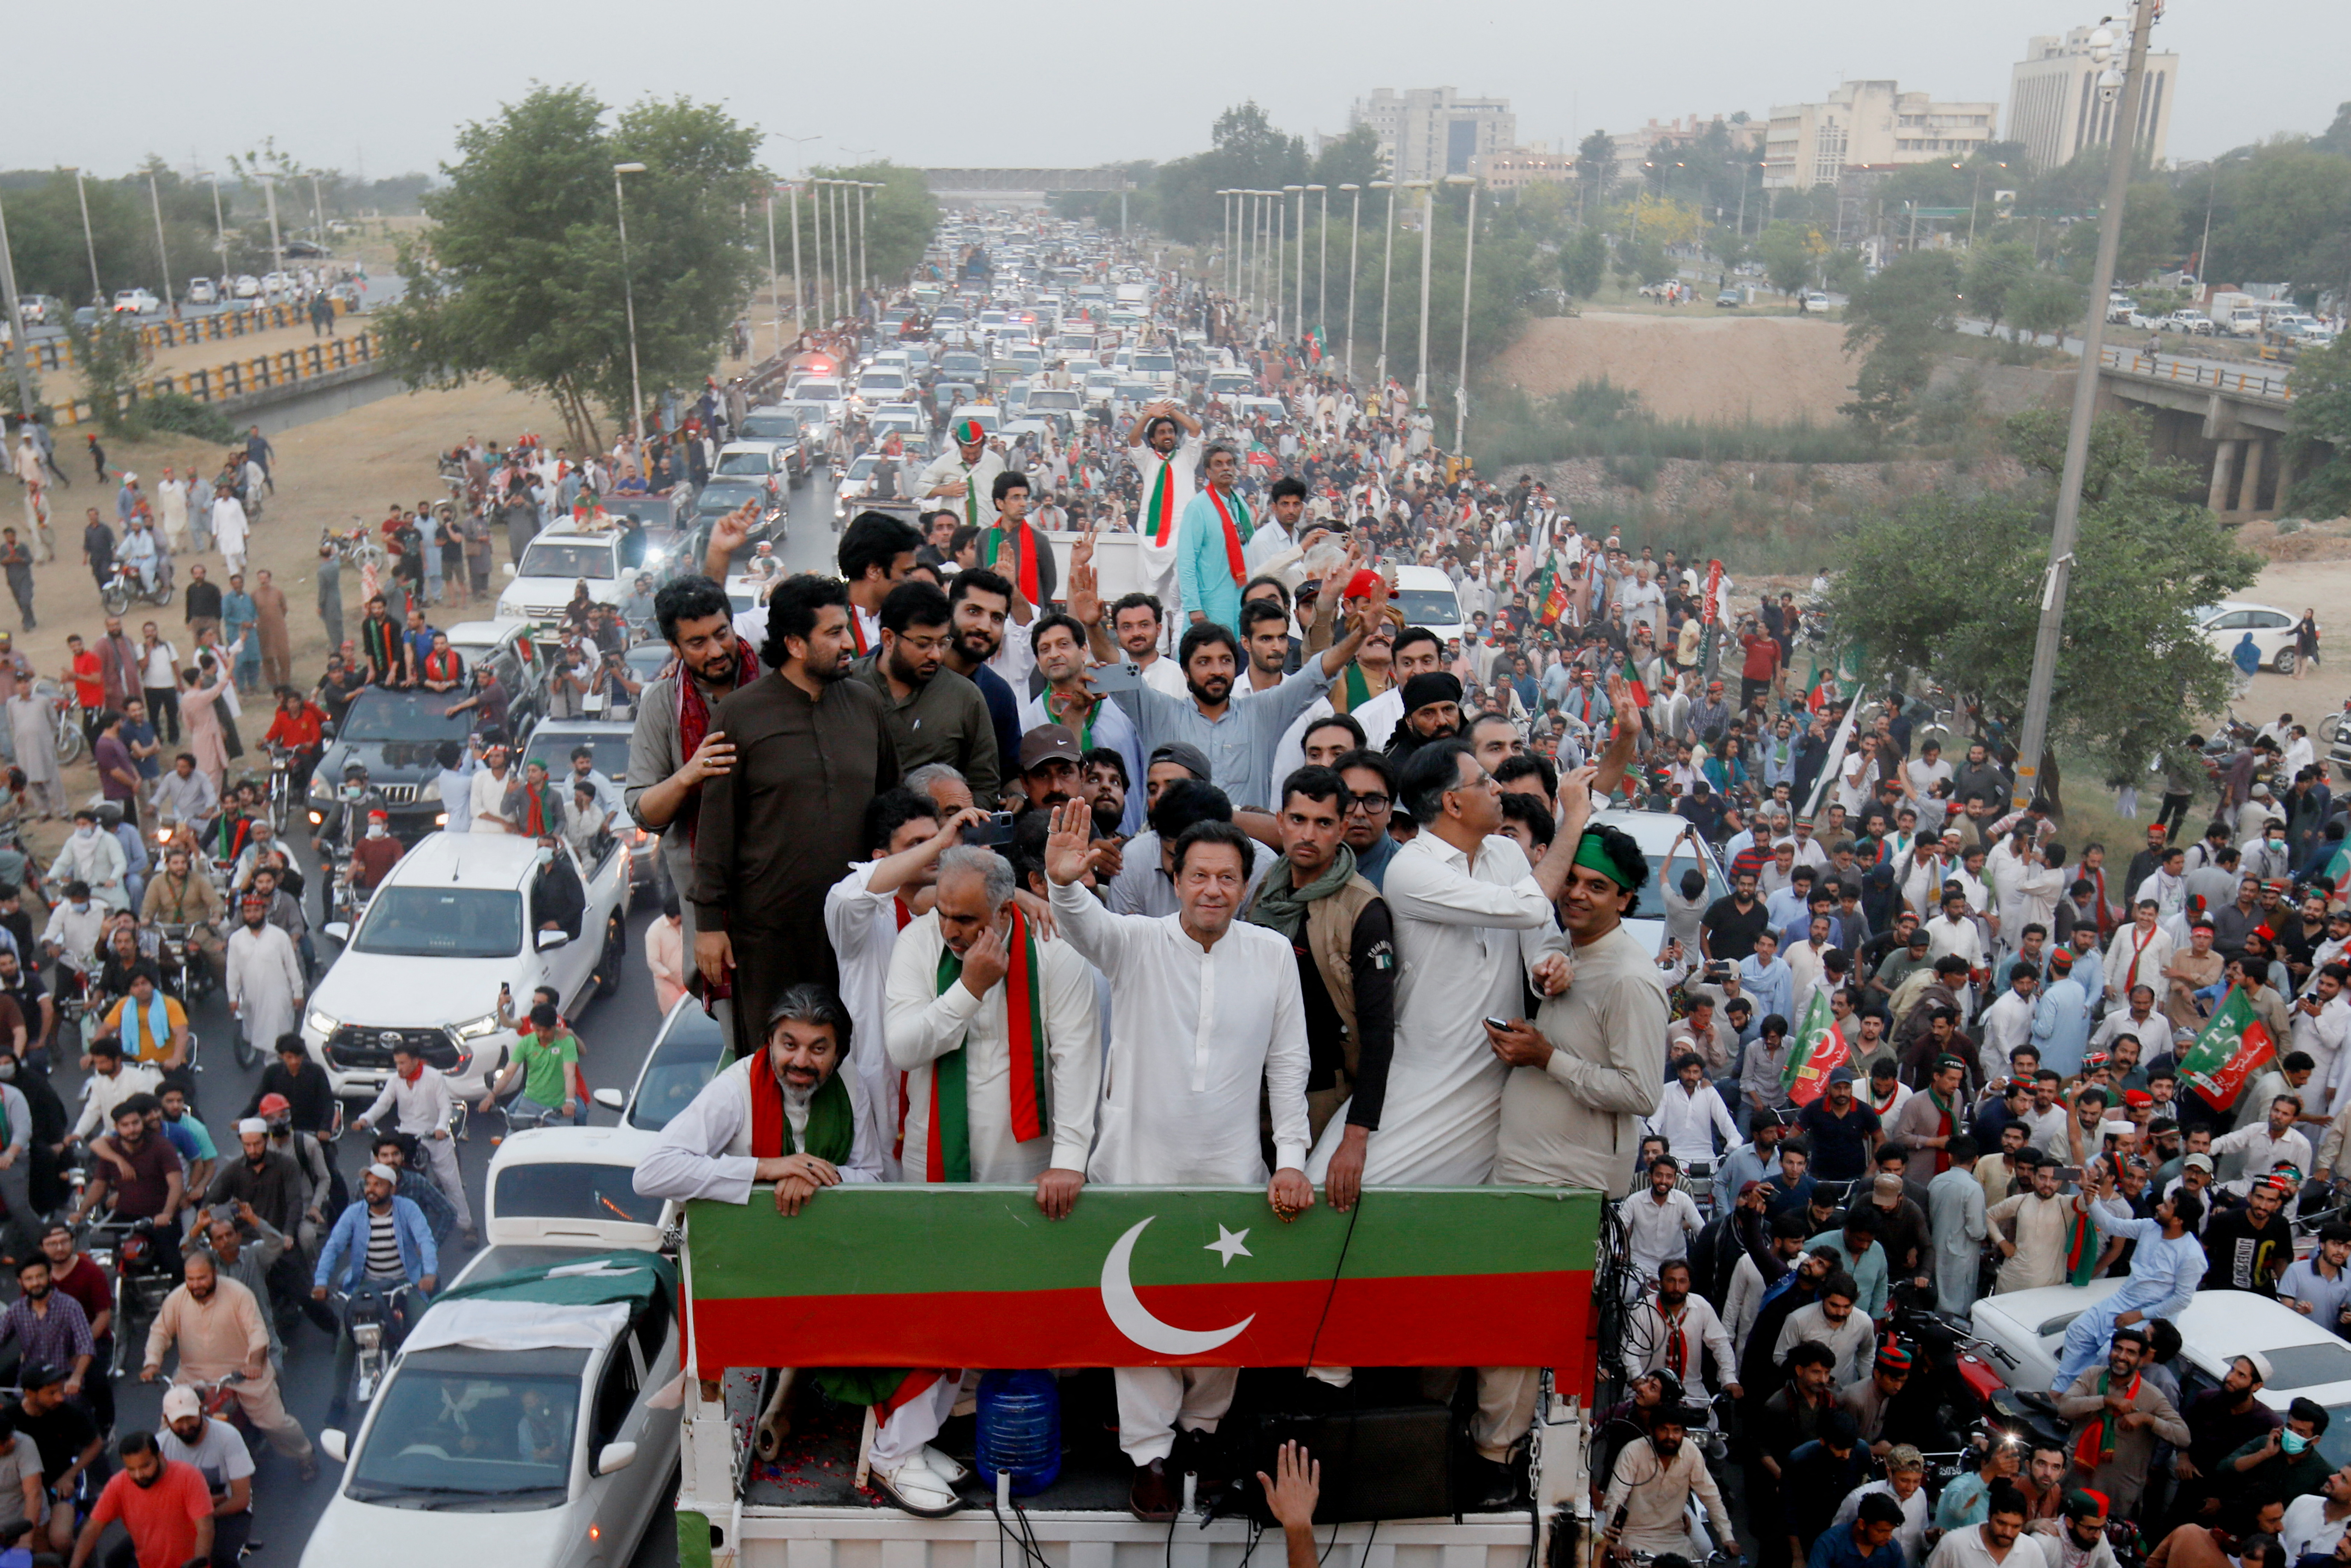 Ousted Pakistani Prime Minister Imran Khan gestures as he leads a protest march in Islamabad